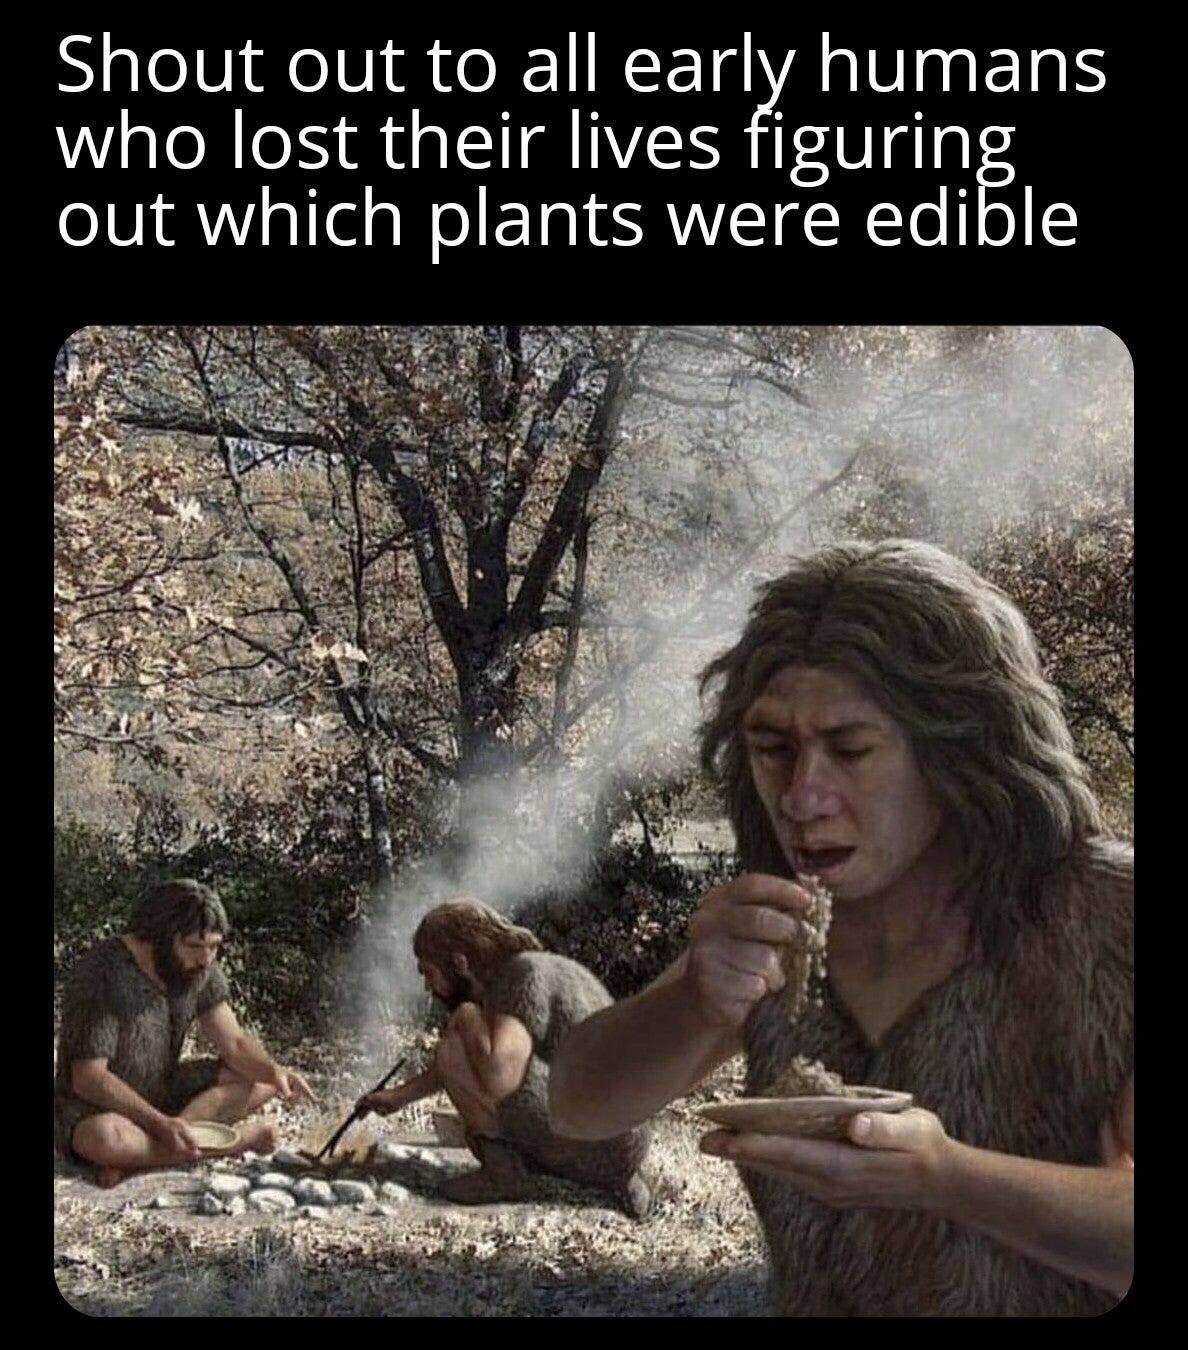 our ancestors - Shout out to all early humans who lost their lives figuring out which plants were edible